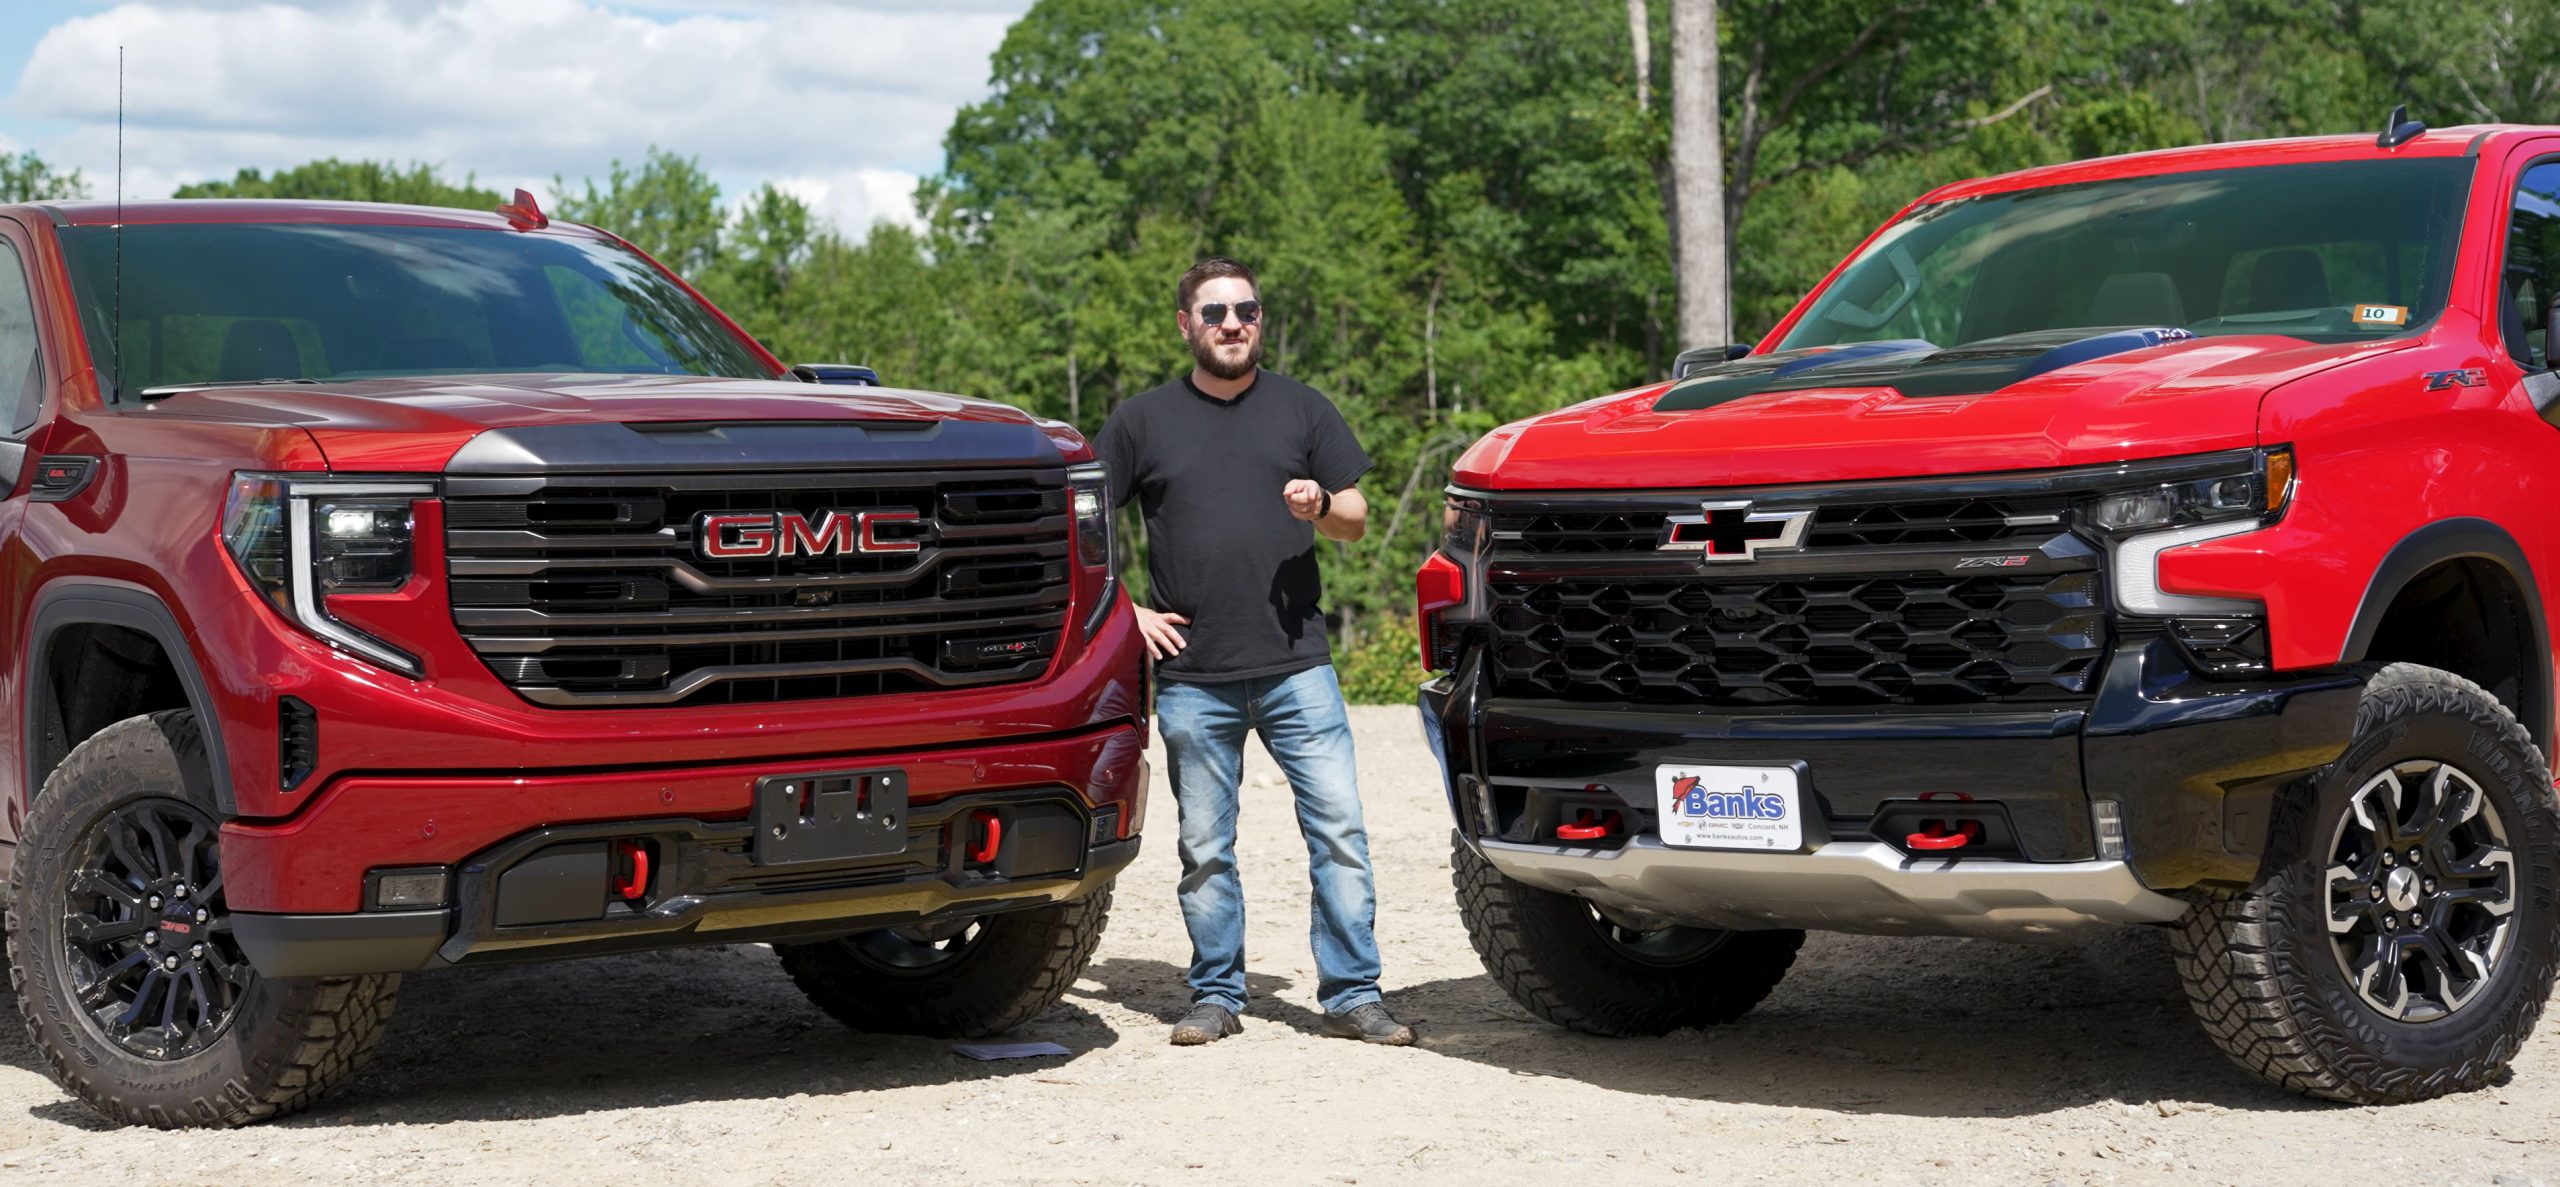 Who Owns GMC?, Is GM the Same as GMC?